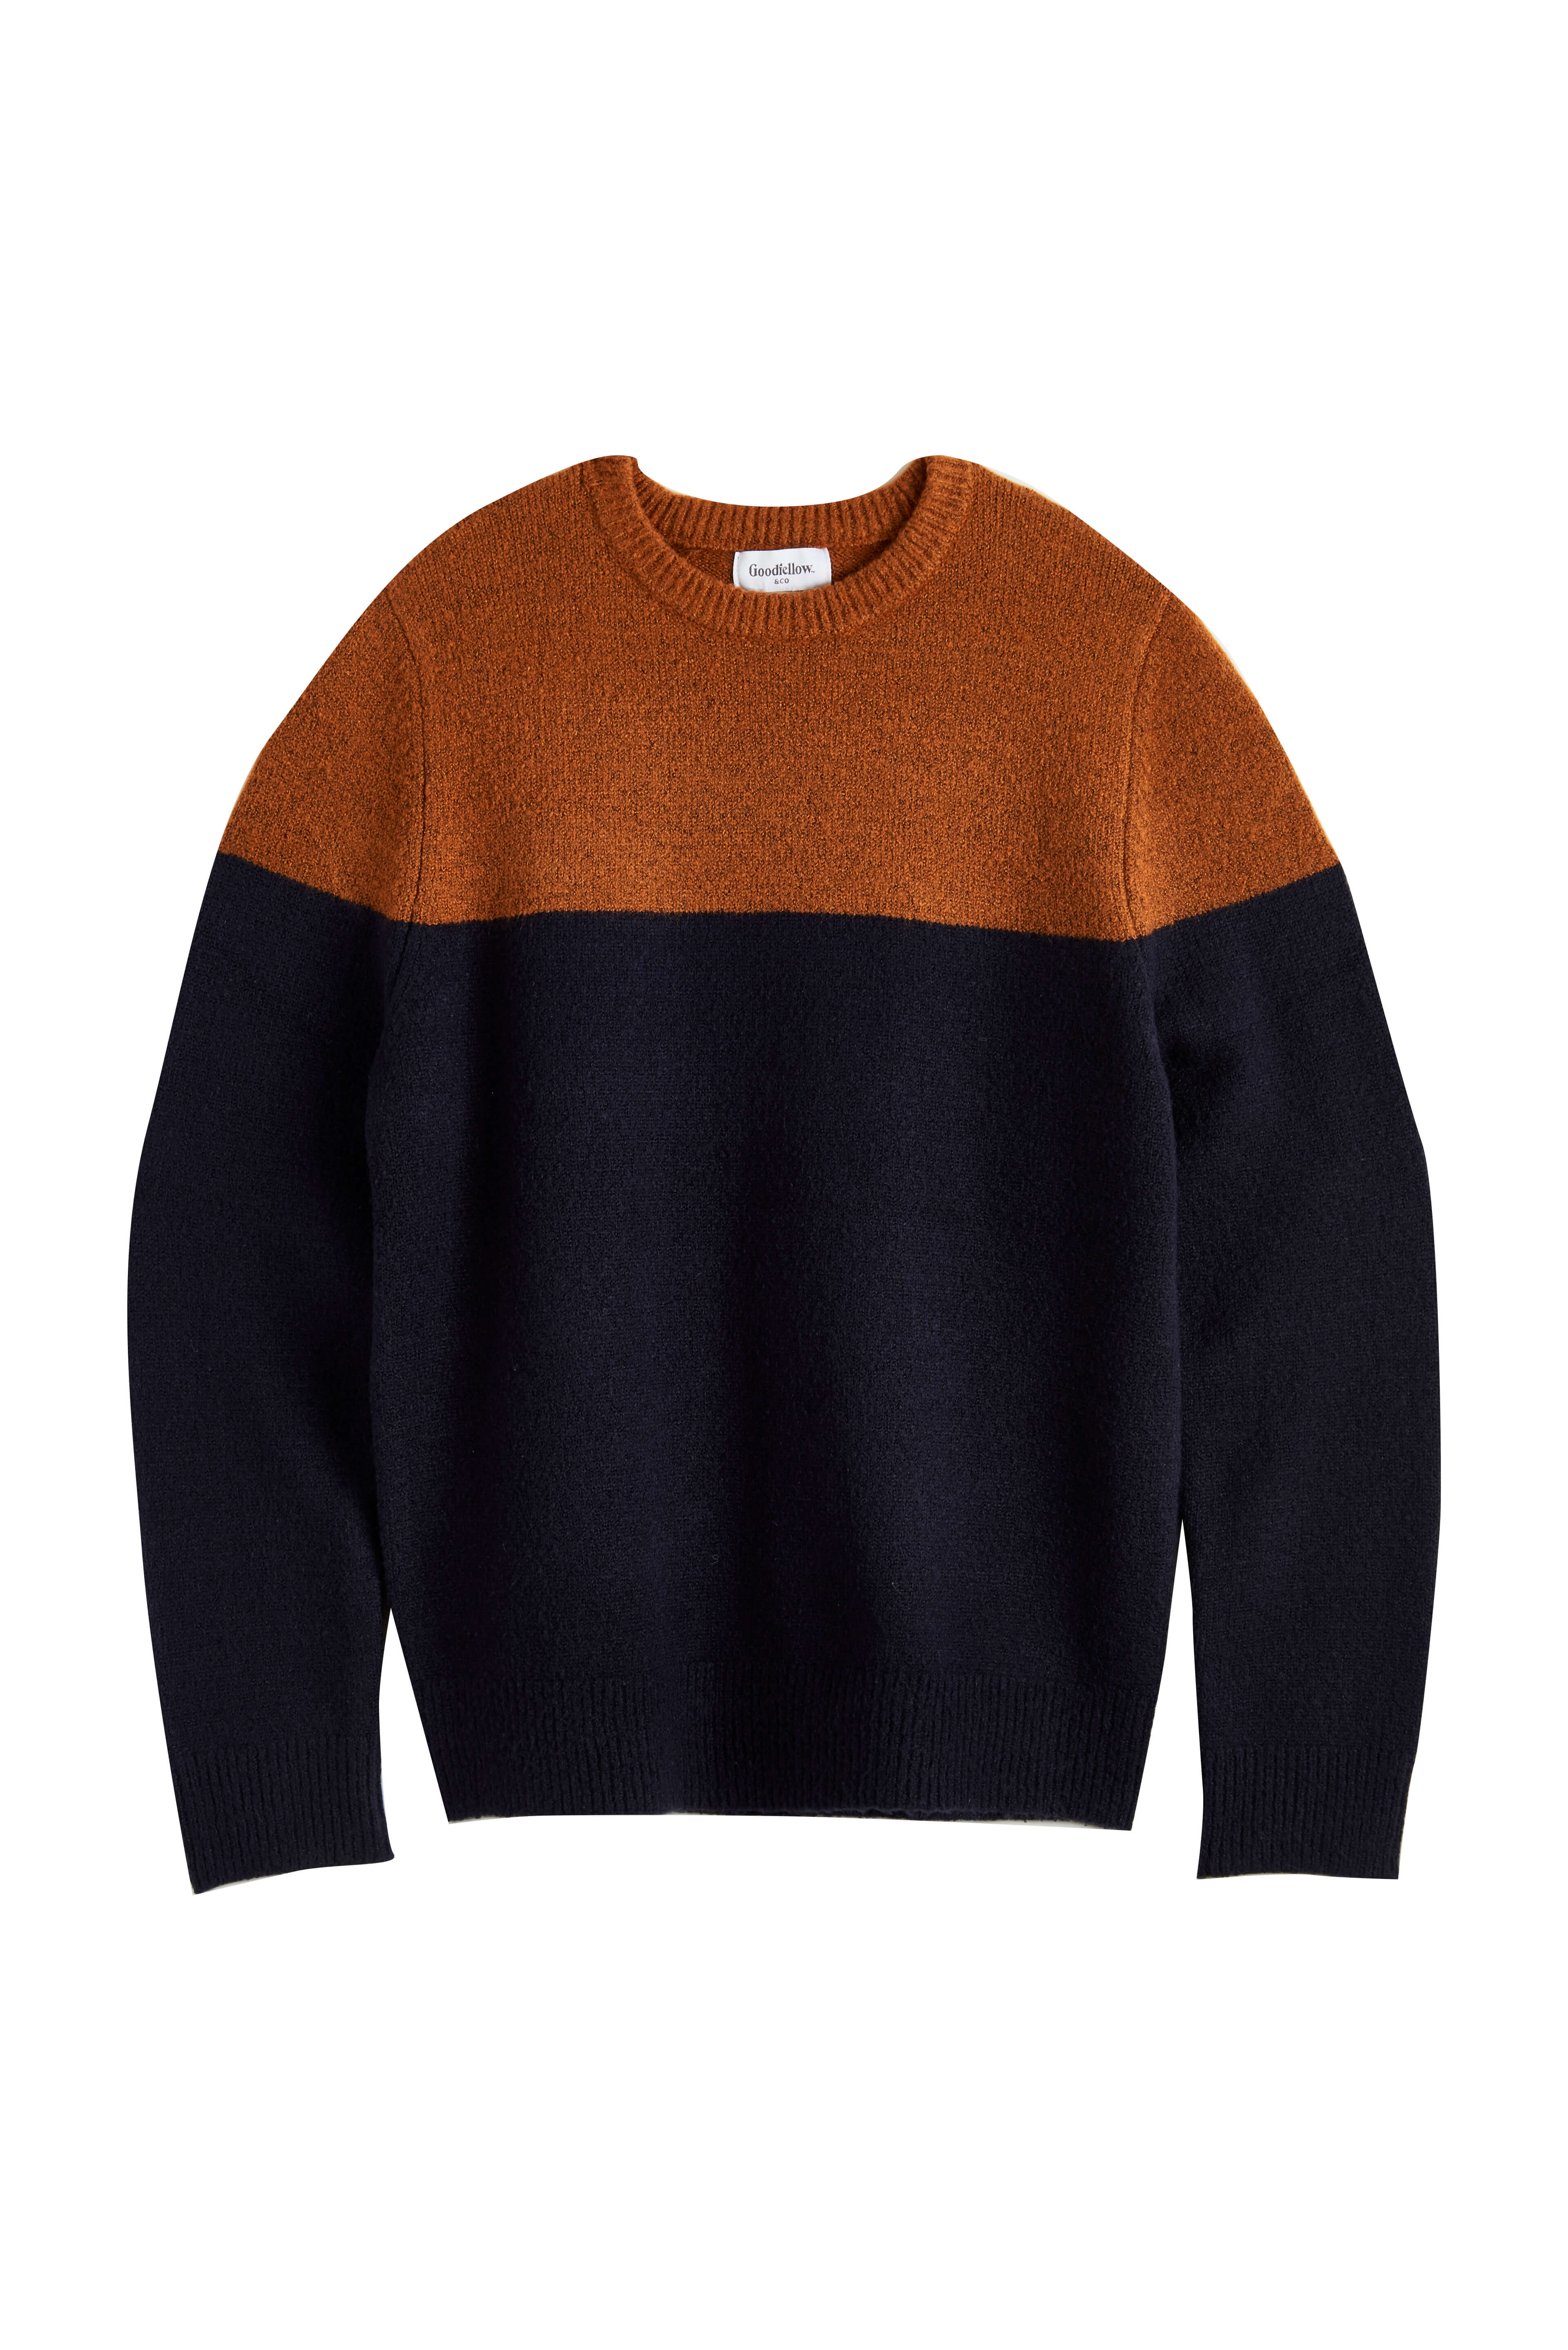 Target Goodfellow & Co Cozy Sweater 